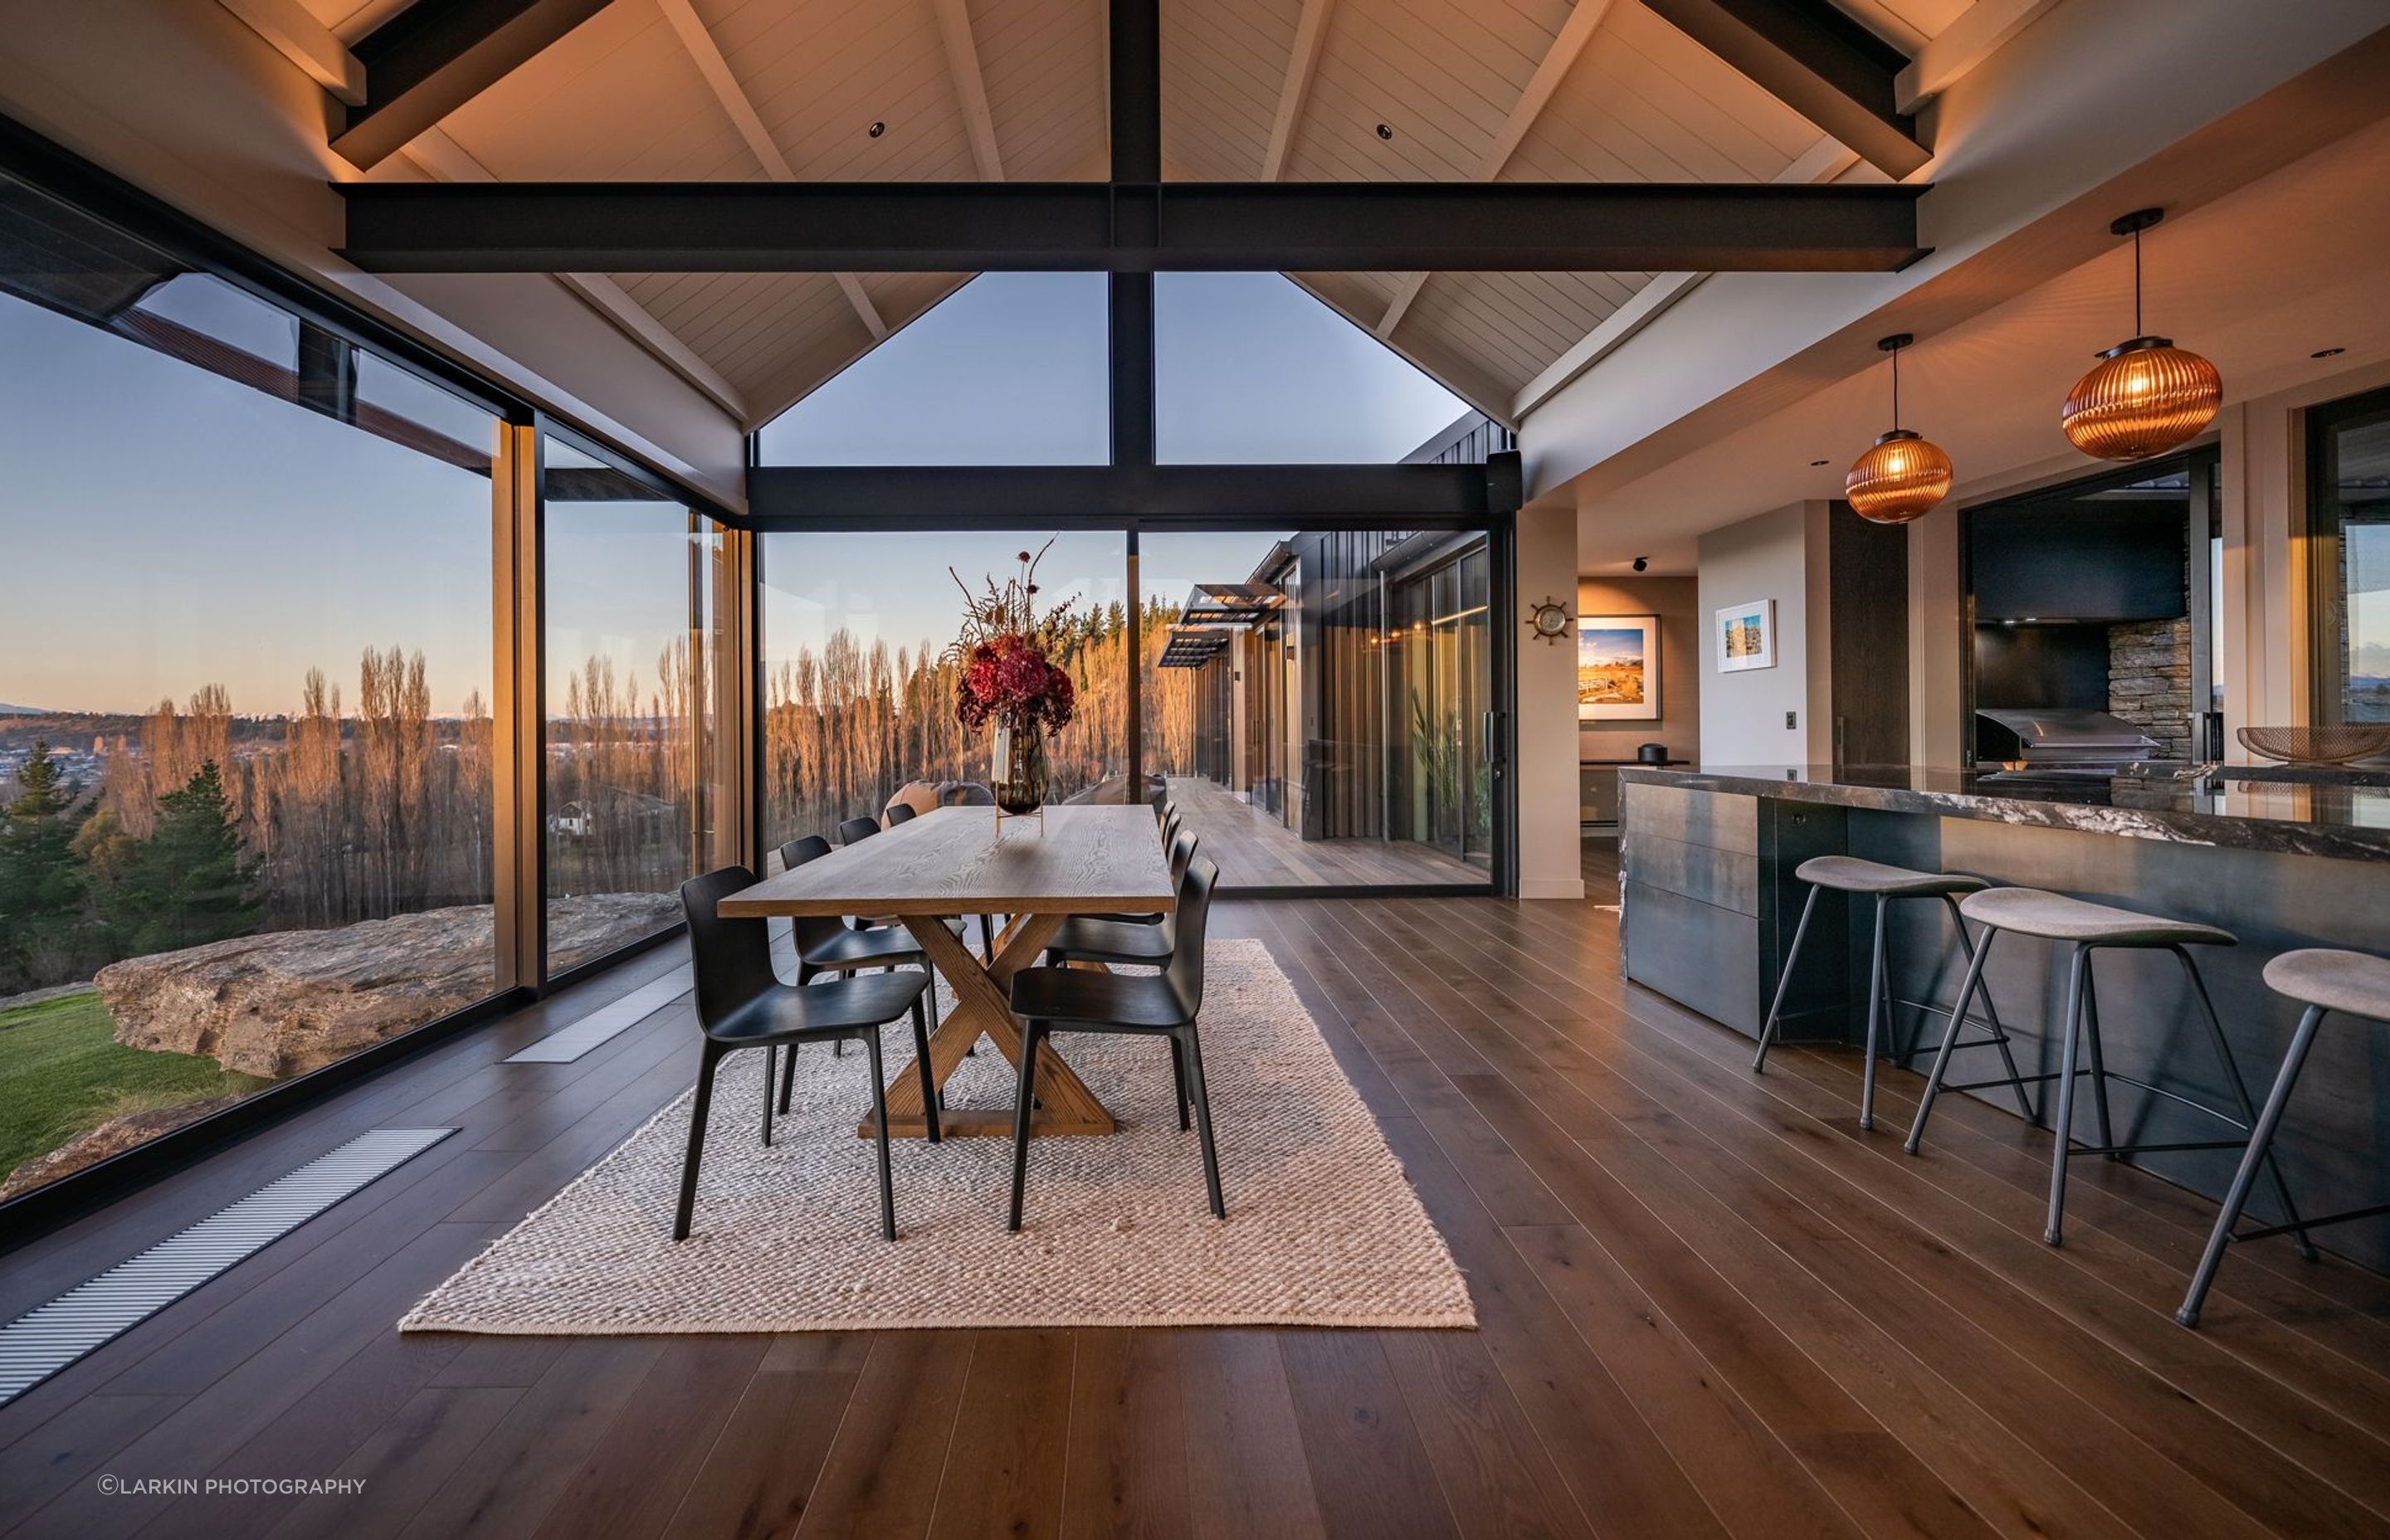 The open-plan kitchen dining enjoys panoramic views of the valley below.